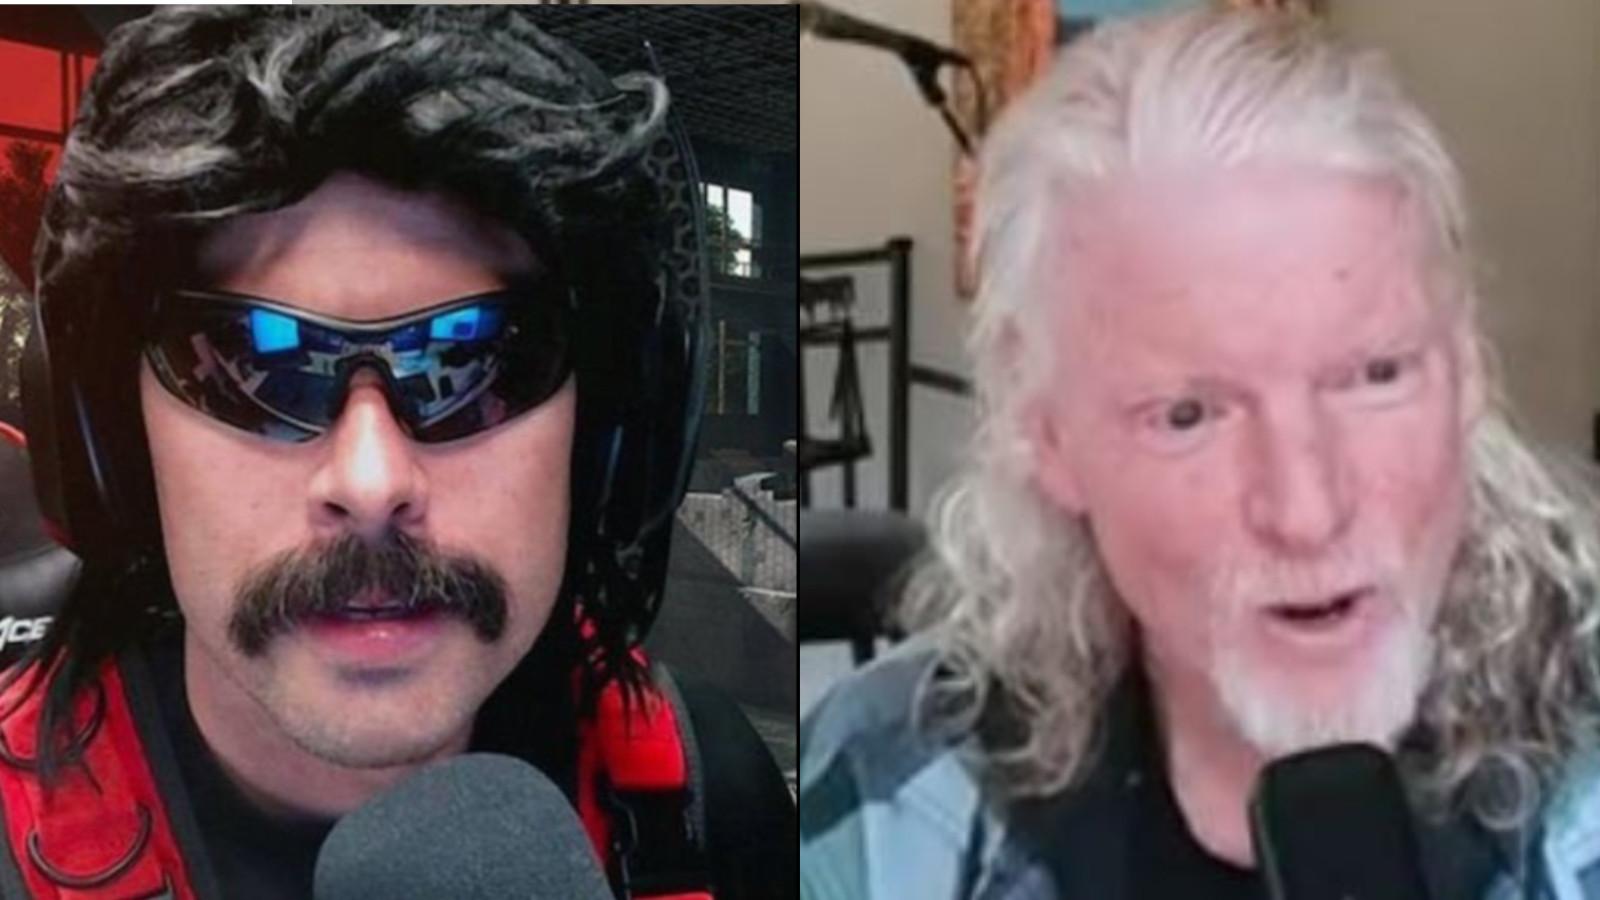 Dr Disrespect next to Twitch CEO Dan Clancy